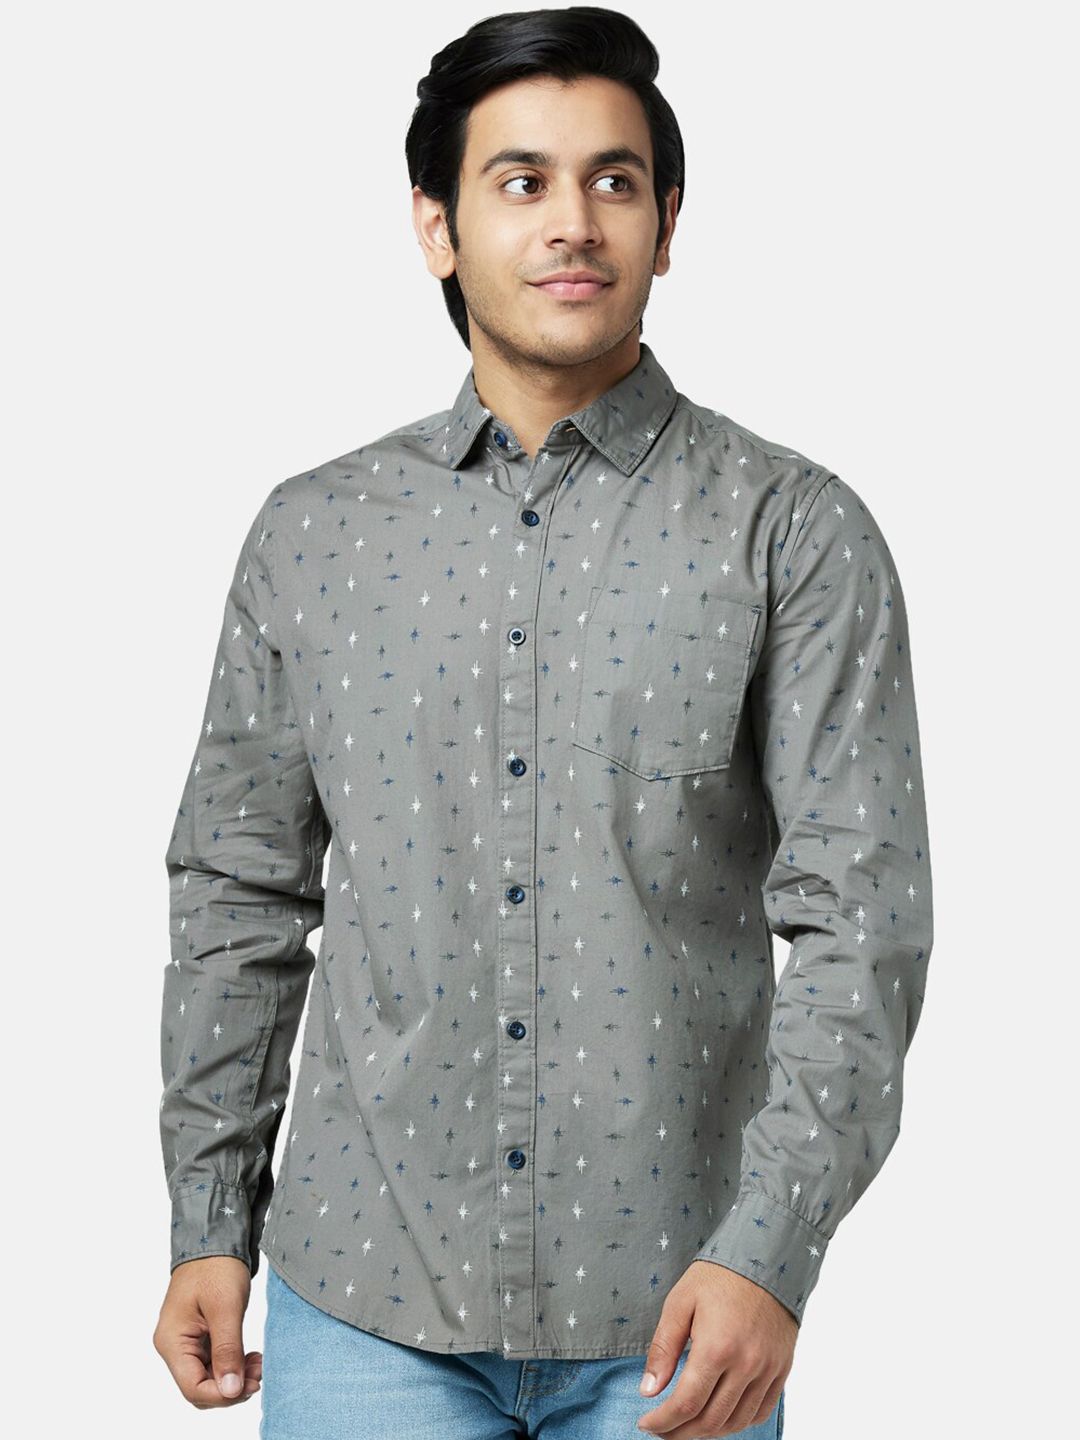 30% OFF on SF JEANS by Pantaloons Grey Top on Myntra